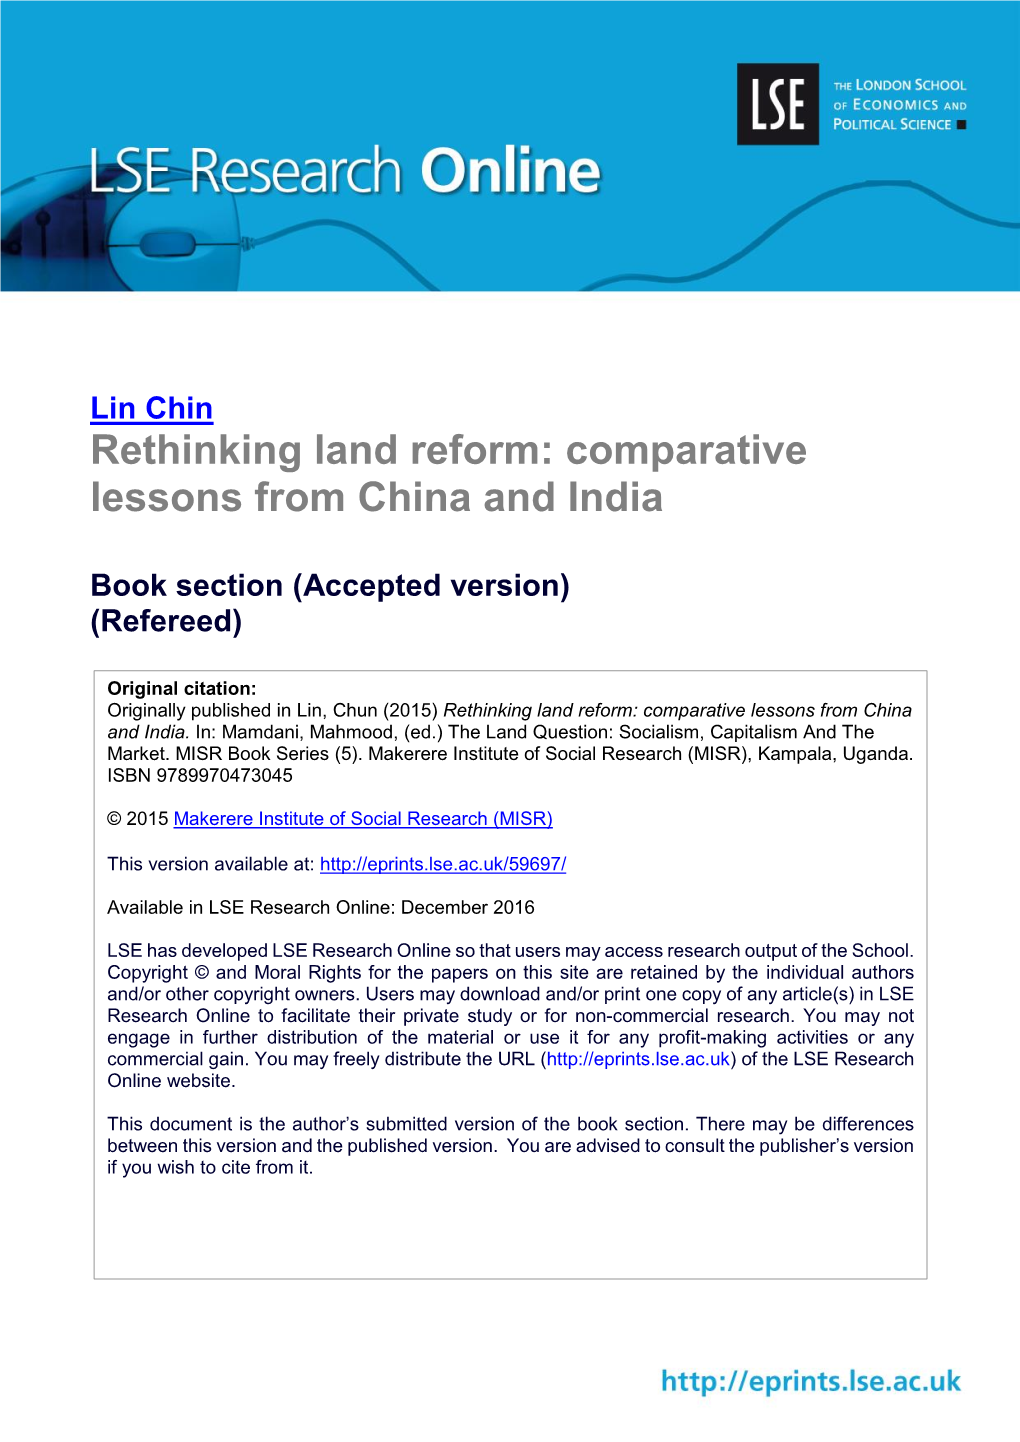 Rethinking Land Reform: Comparative Lessons from China and India